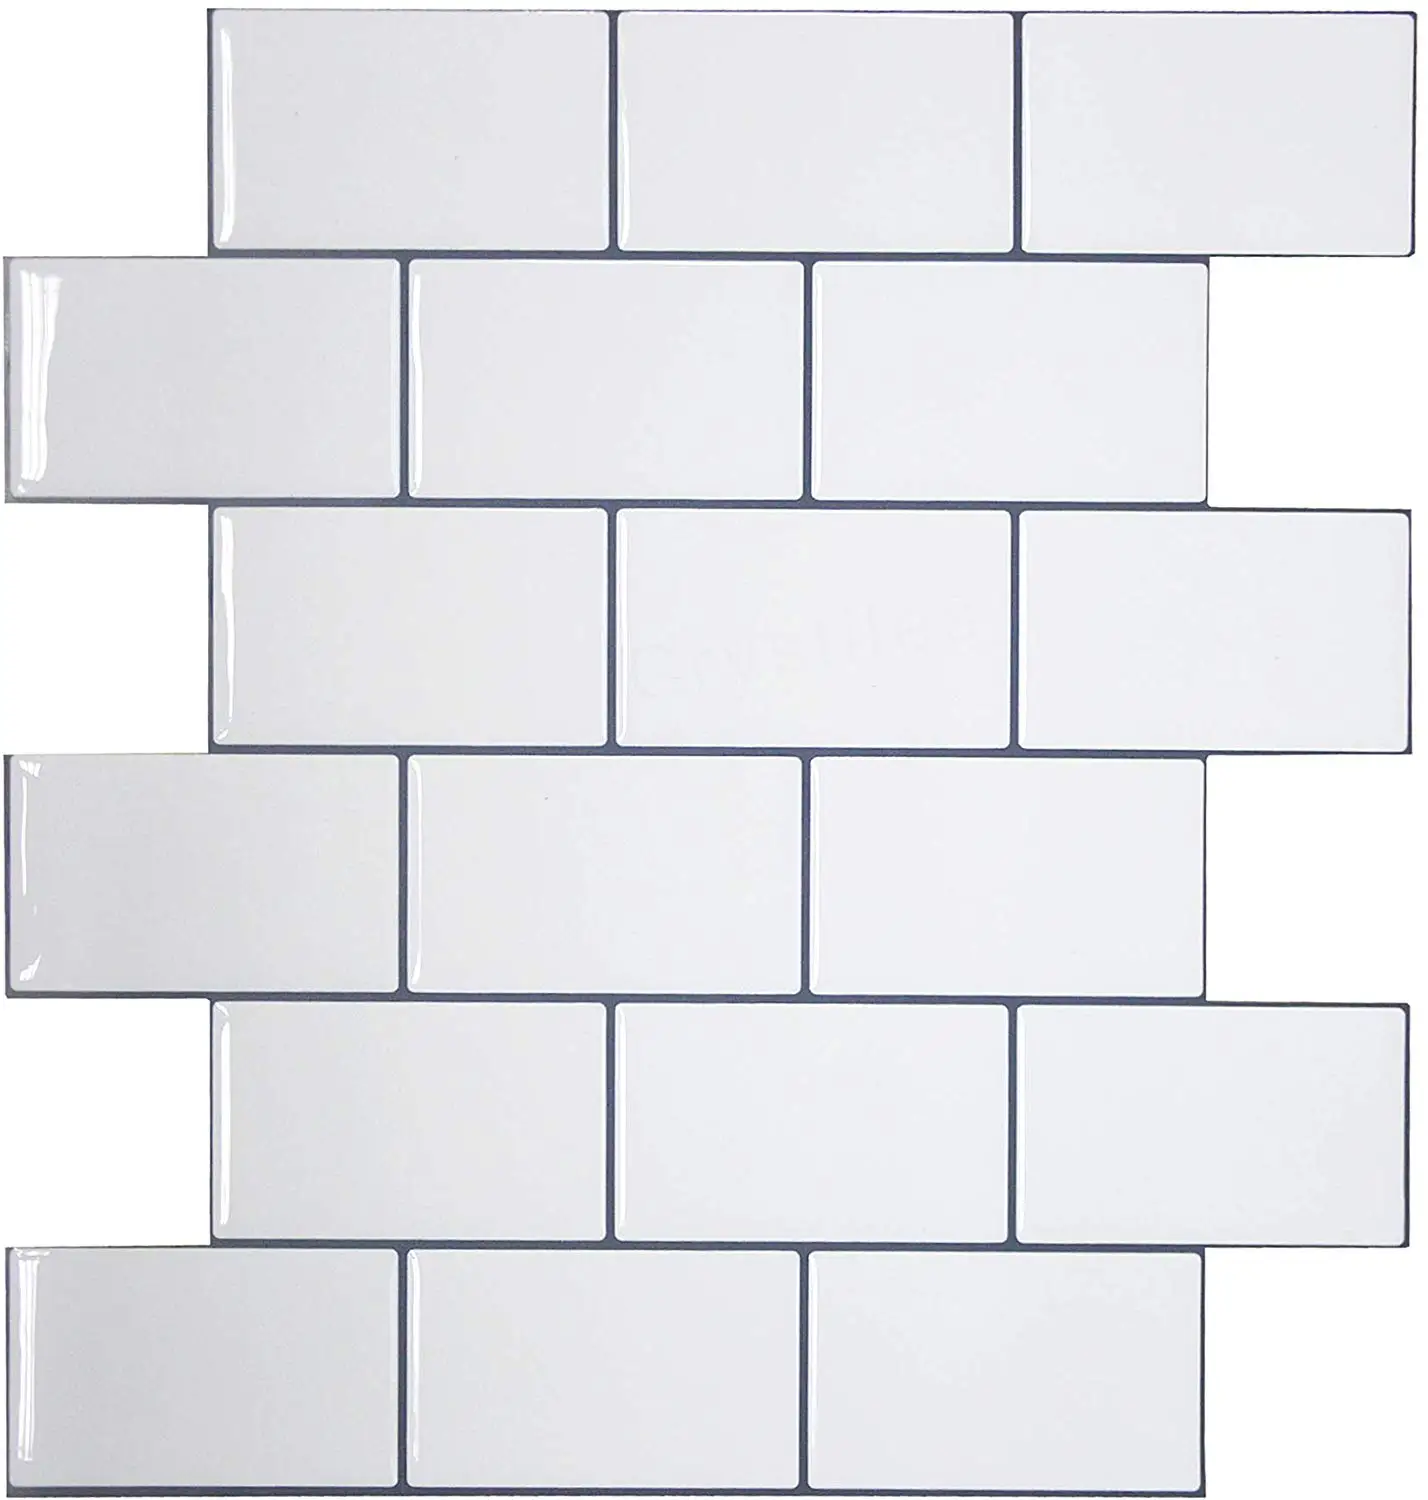 

Self adhesive Wall Sticker 3D Peel and Stick Upgrade Thicker Wall Tile 12*12 Inch White Subway Style Mosaic Tiles Waterproof